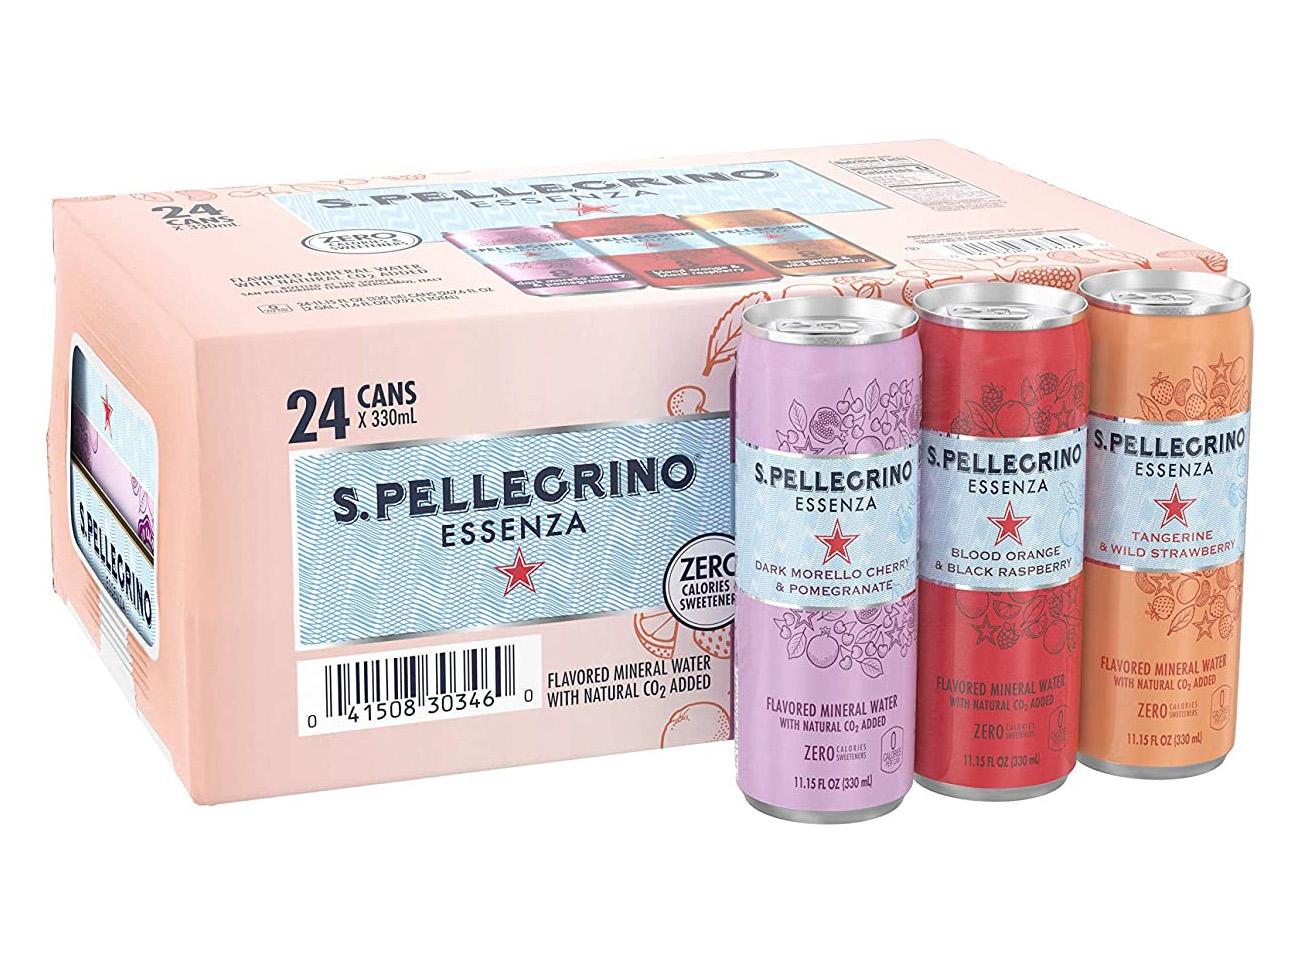 24 San Pellegrino Essenza Flavored Mineral Water for $14.23 Shipped